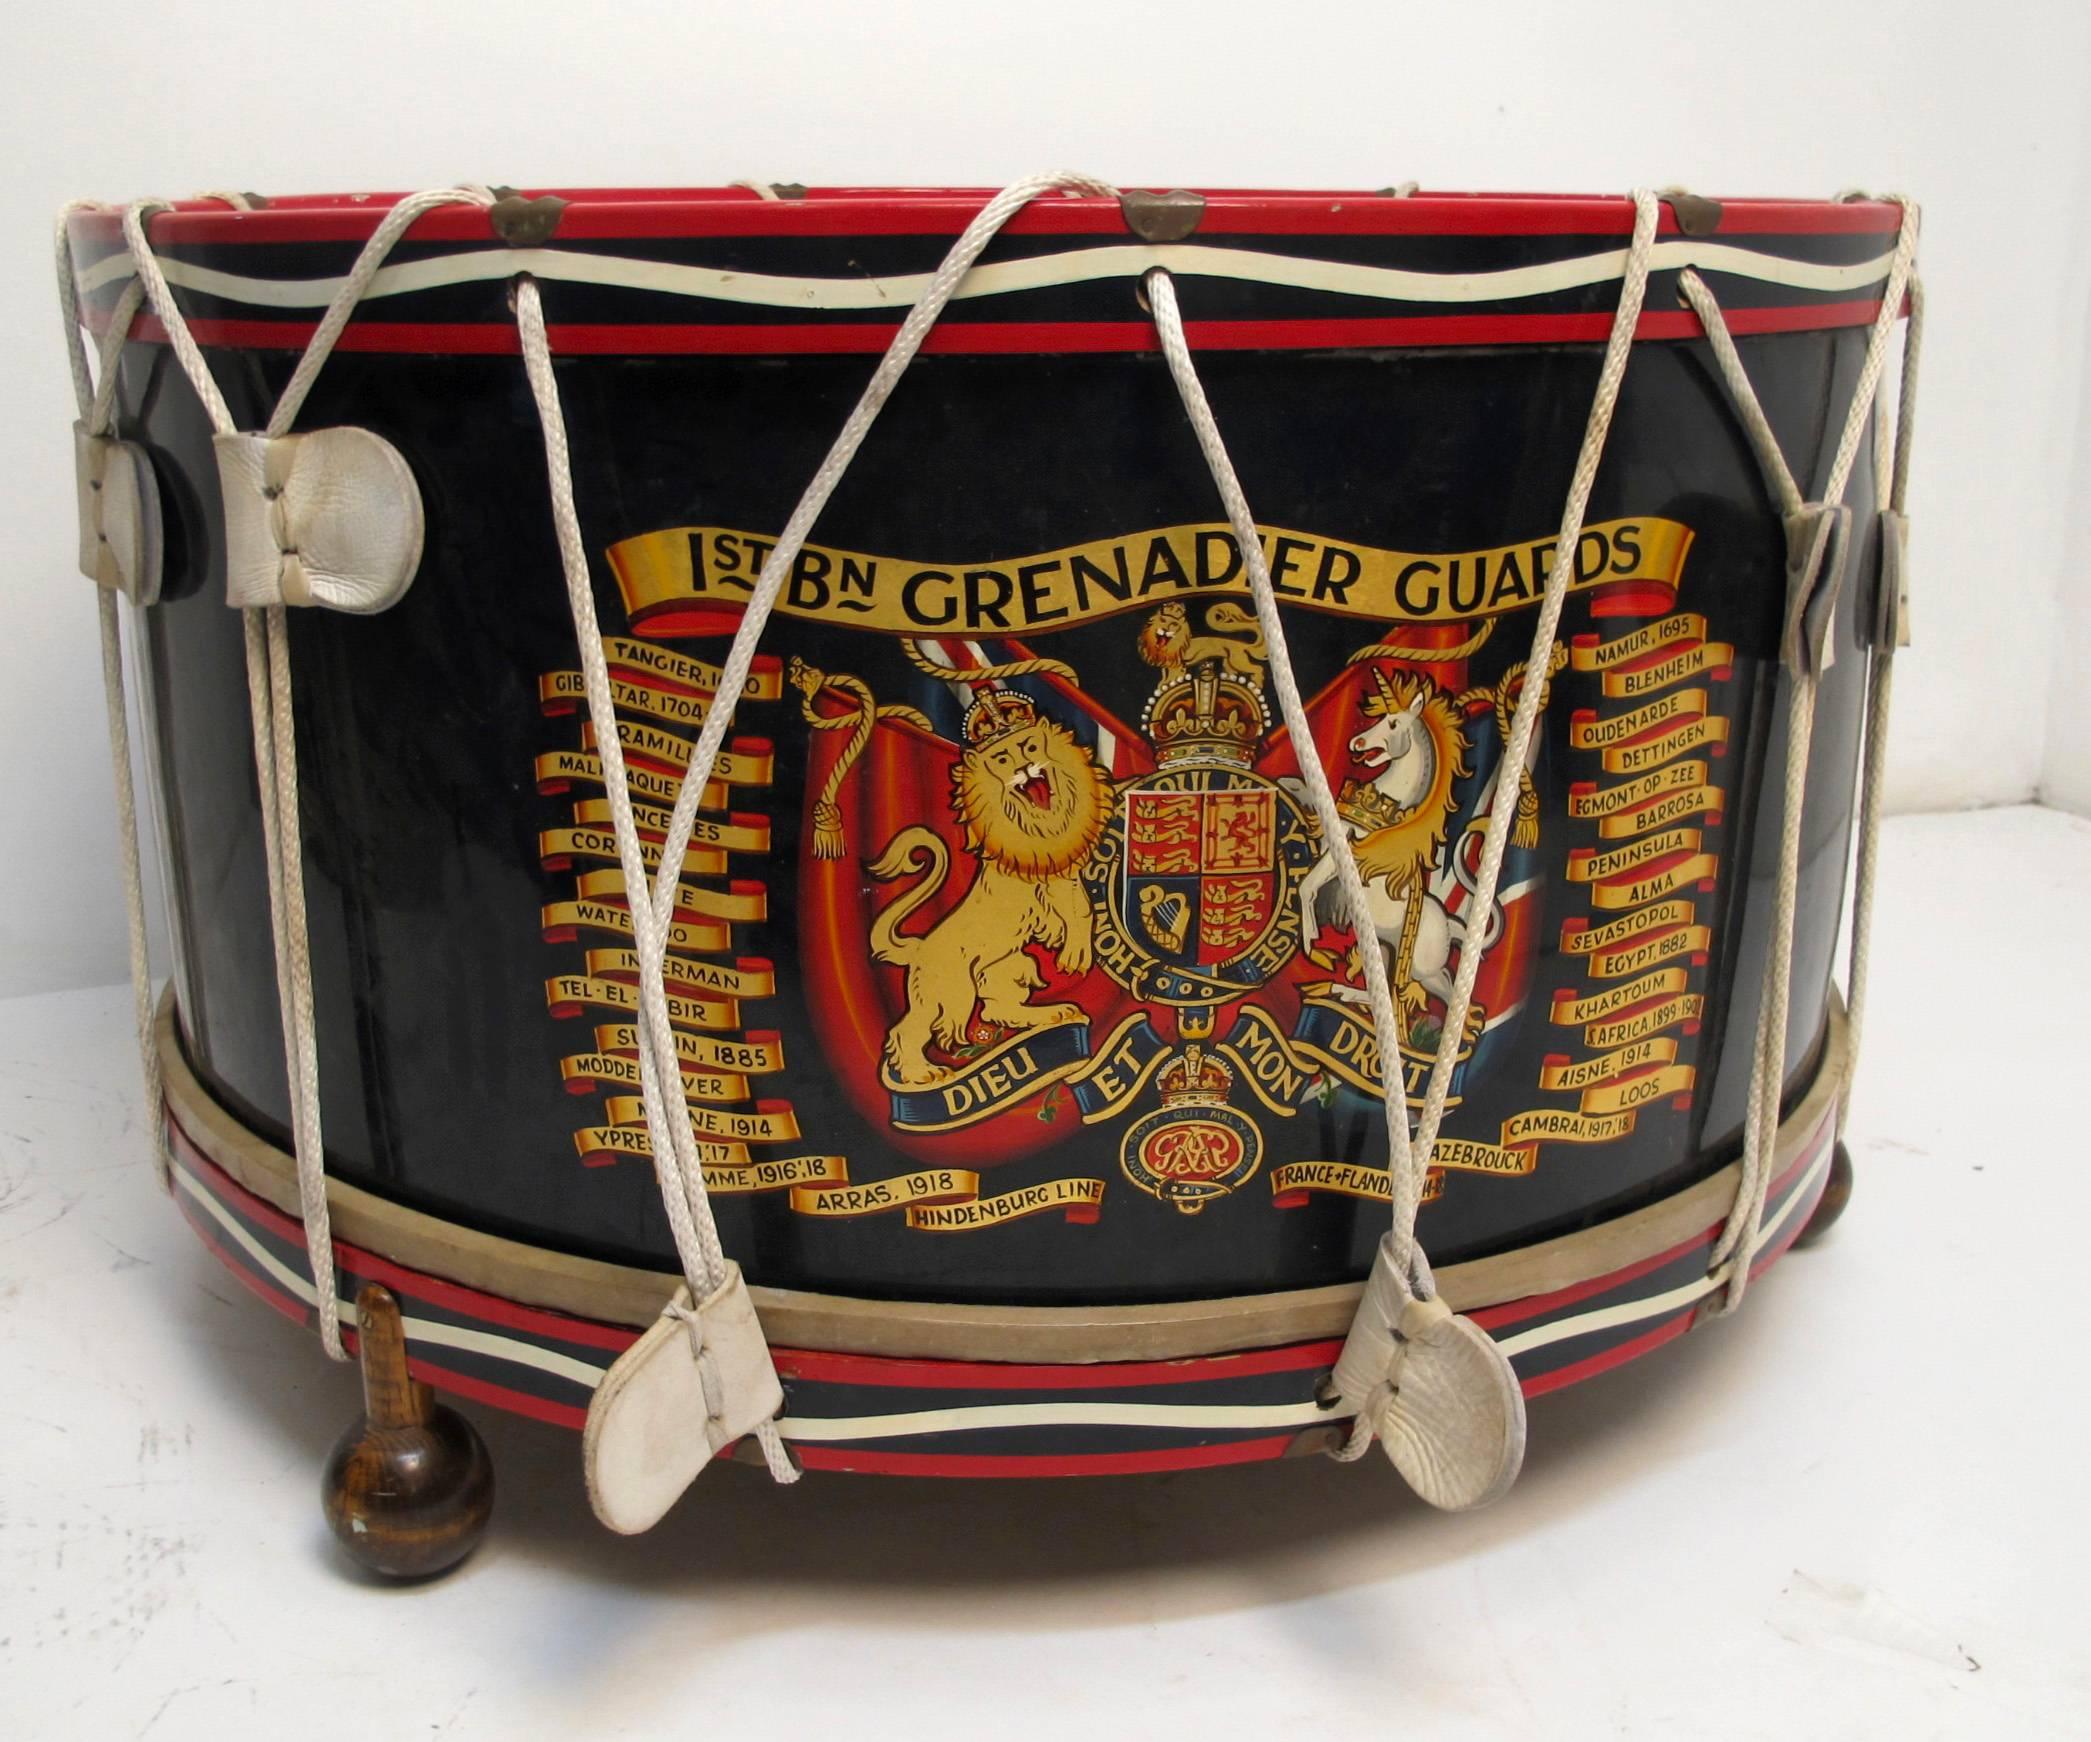 An early 20th century large parade drum made by the English company George Potter & Co. Still retains its original makers label. Now converted to a table, feet have been added at the base (shipped without glass top.)